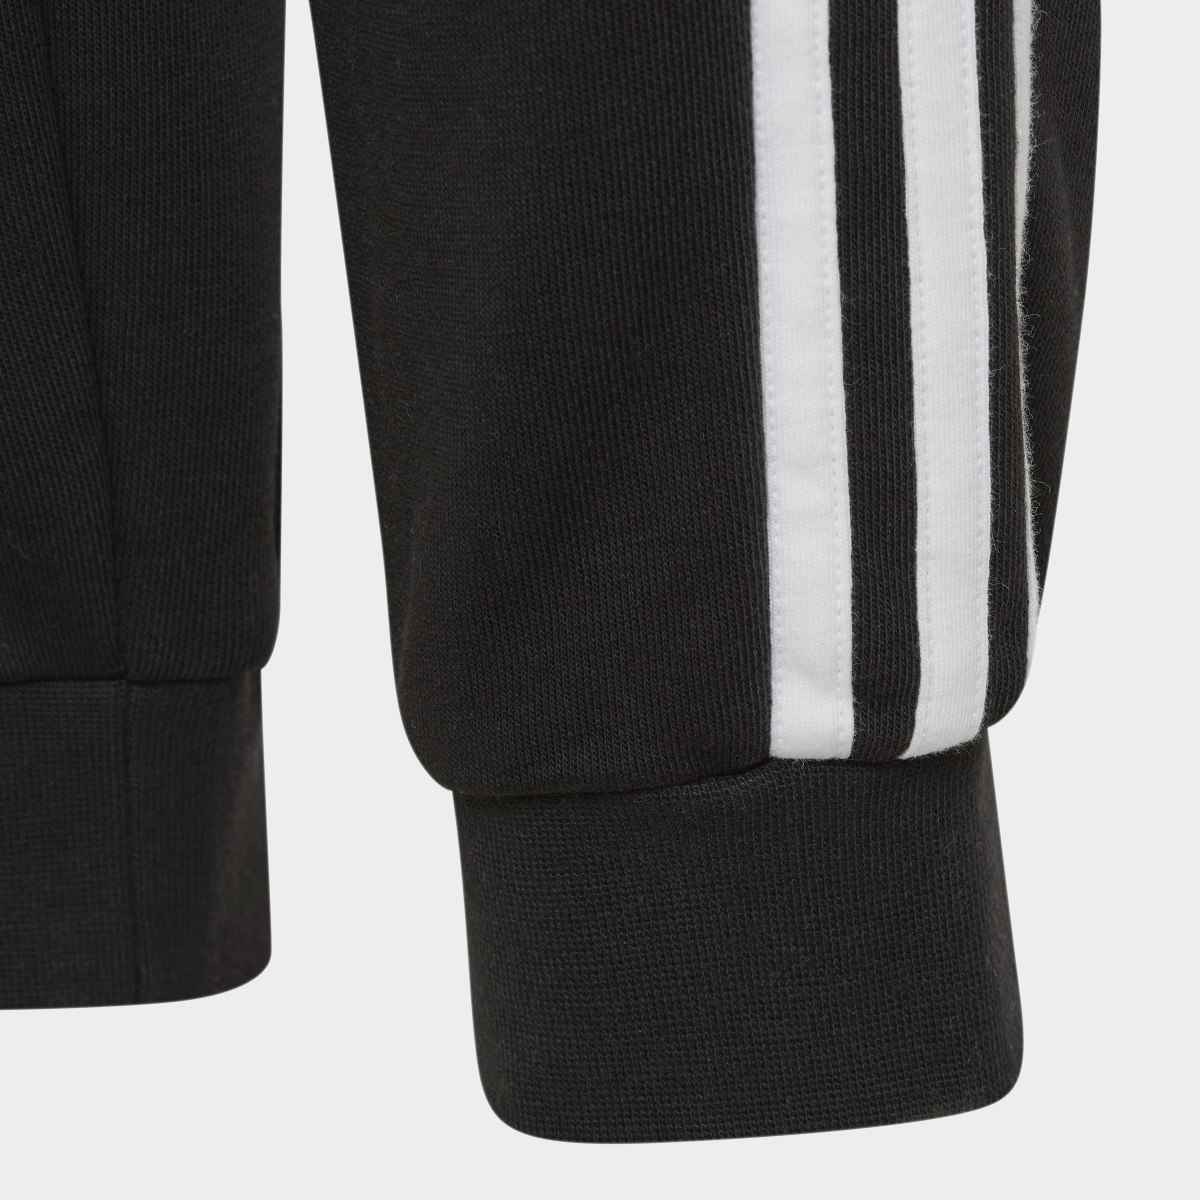 Adidas Germany Tracksuit Bottoms. 4